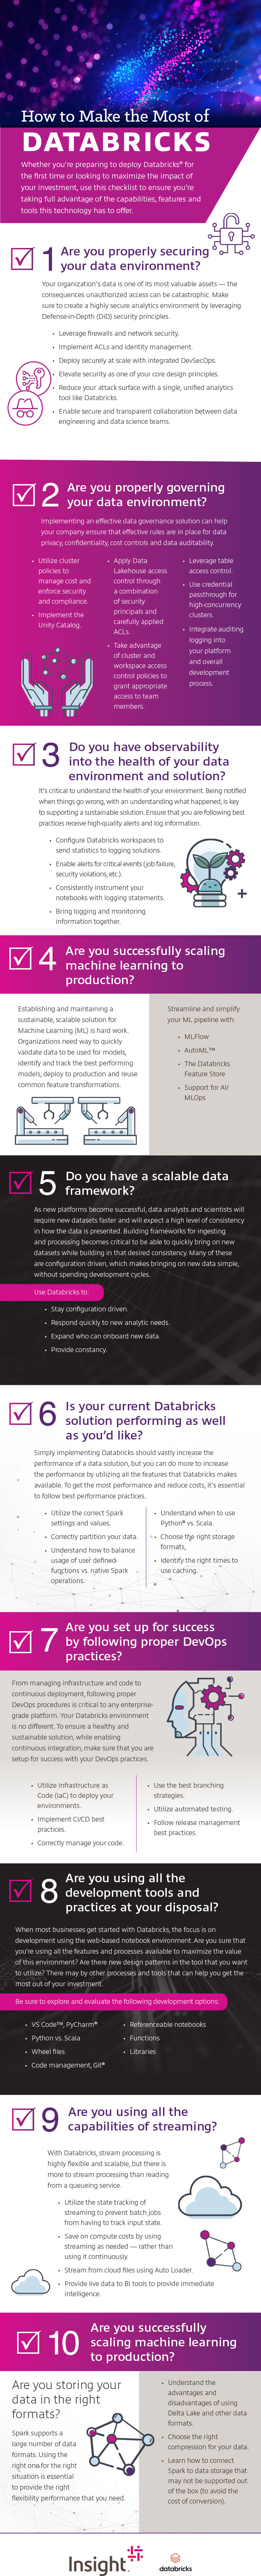 Making the Most of Databricks Checklist infographic as transcribed below